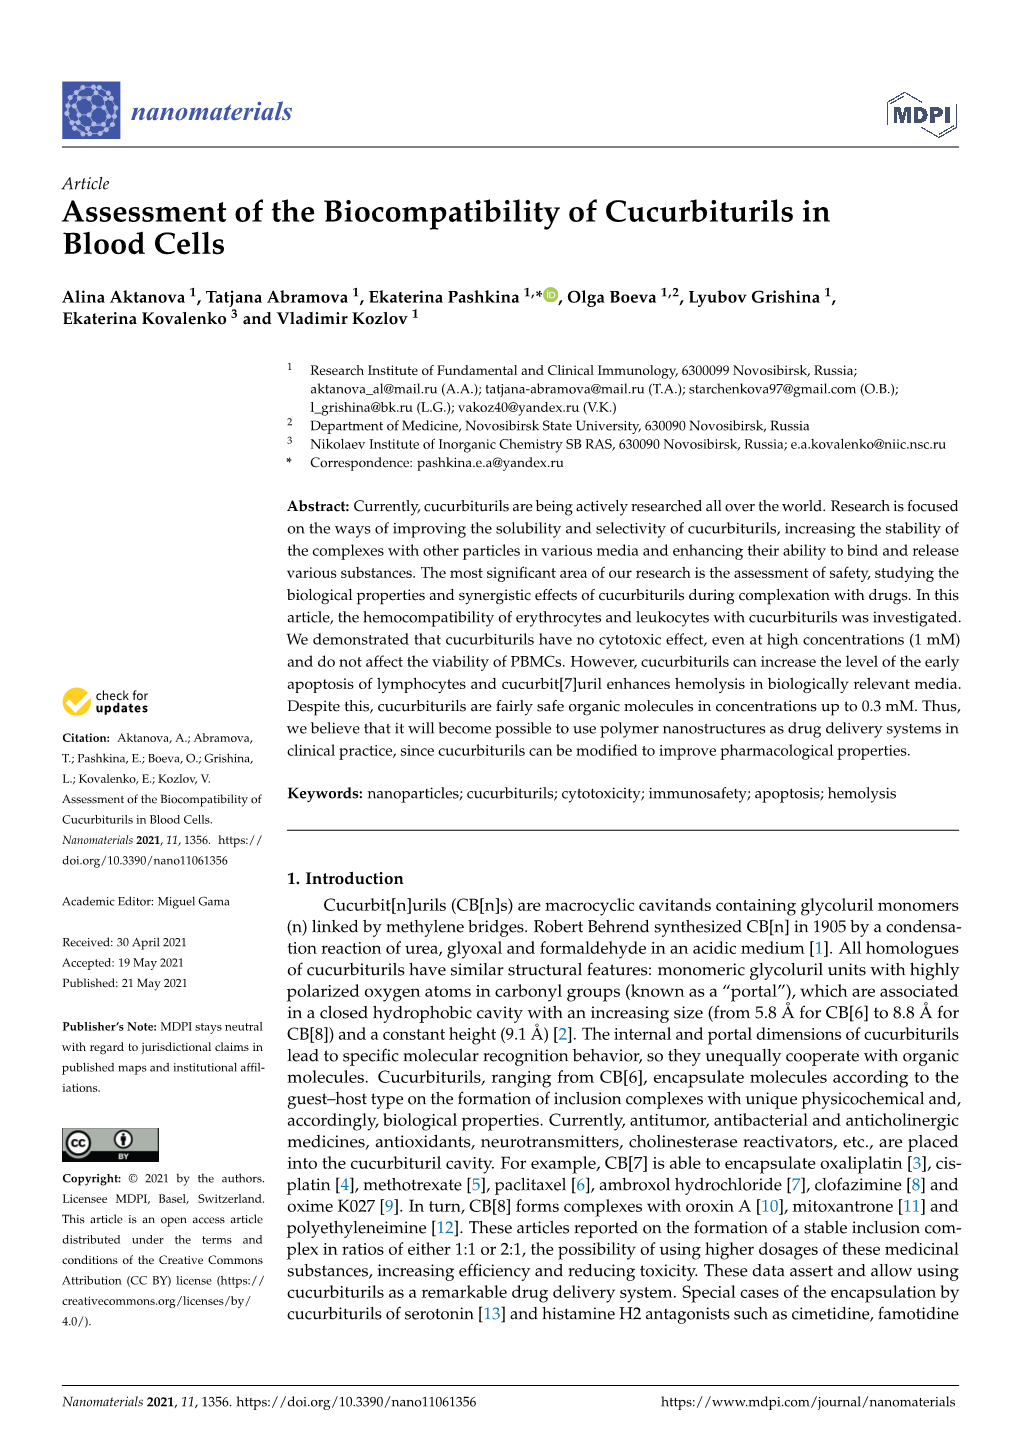 Assessment of the Biocompatibility of Cucurbiturils in Blood Cells